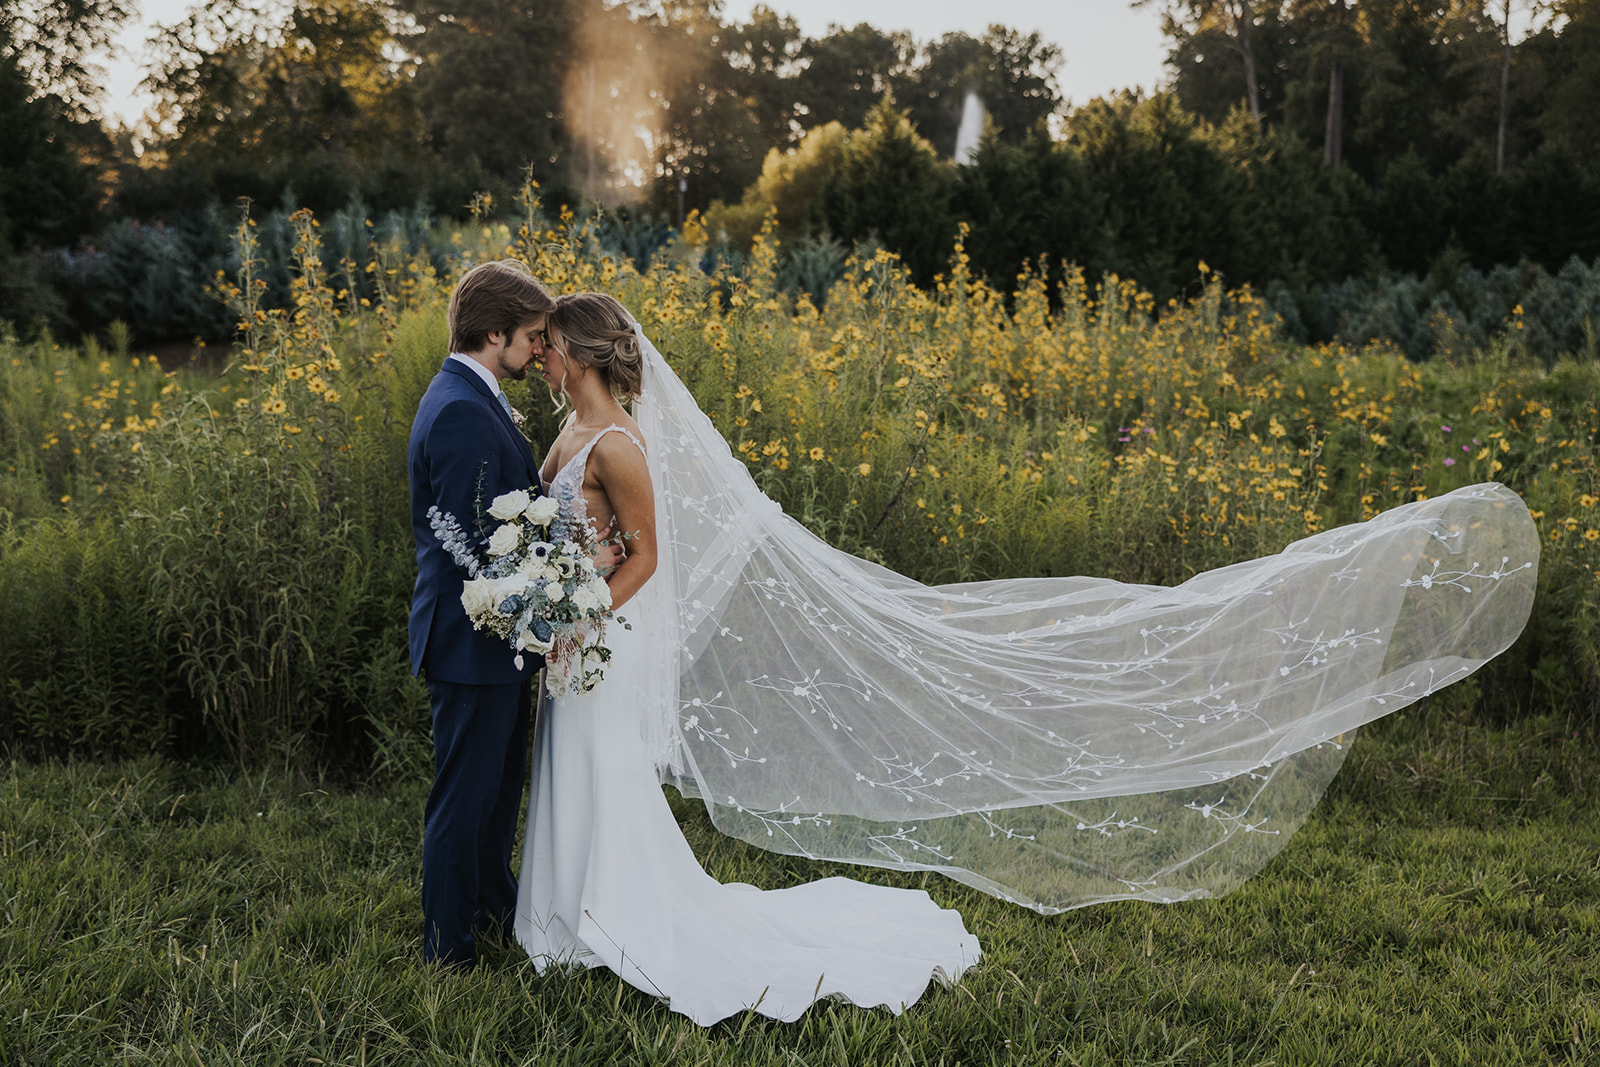 Stunning bride and groom share a kiss during their dreamy Georgia wedding